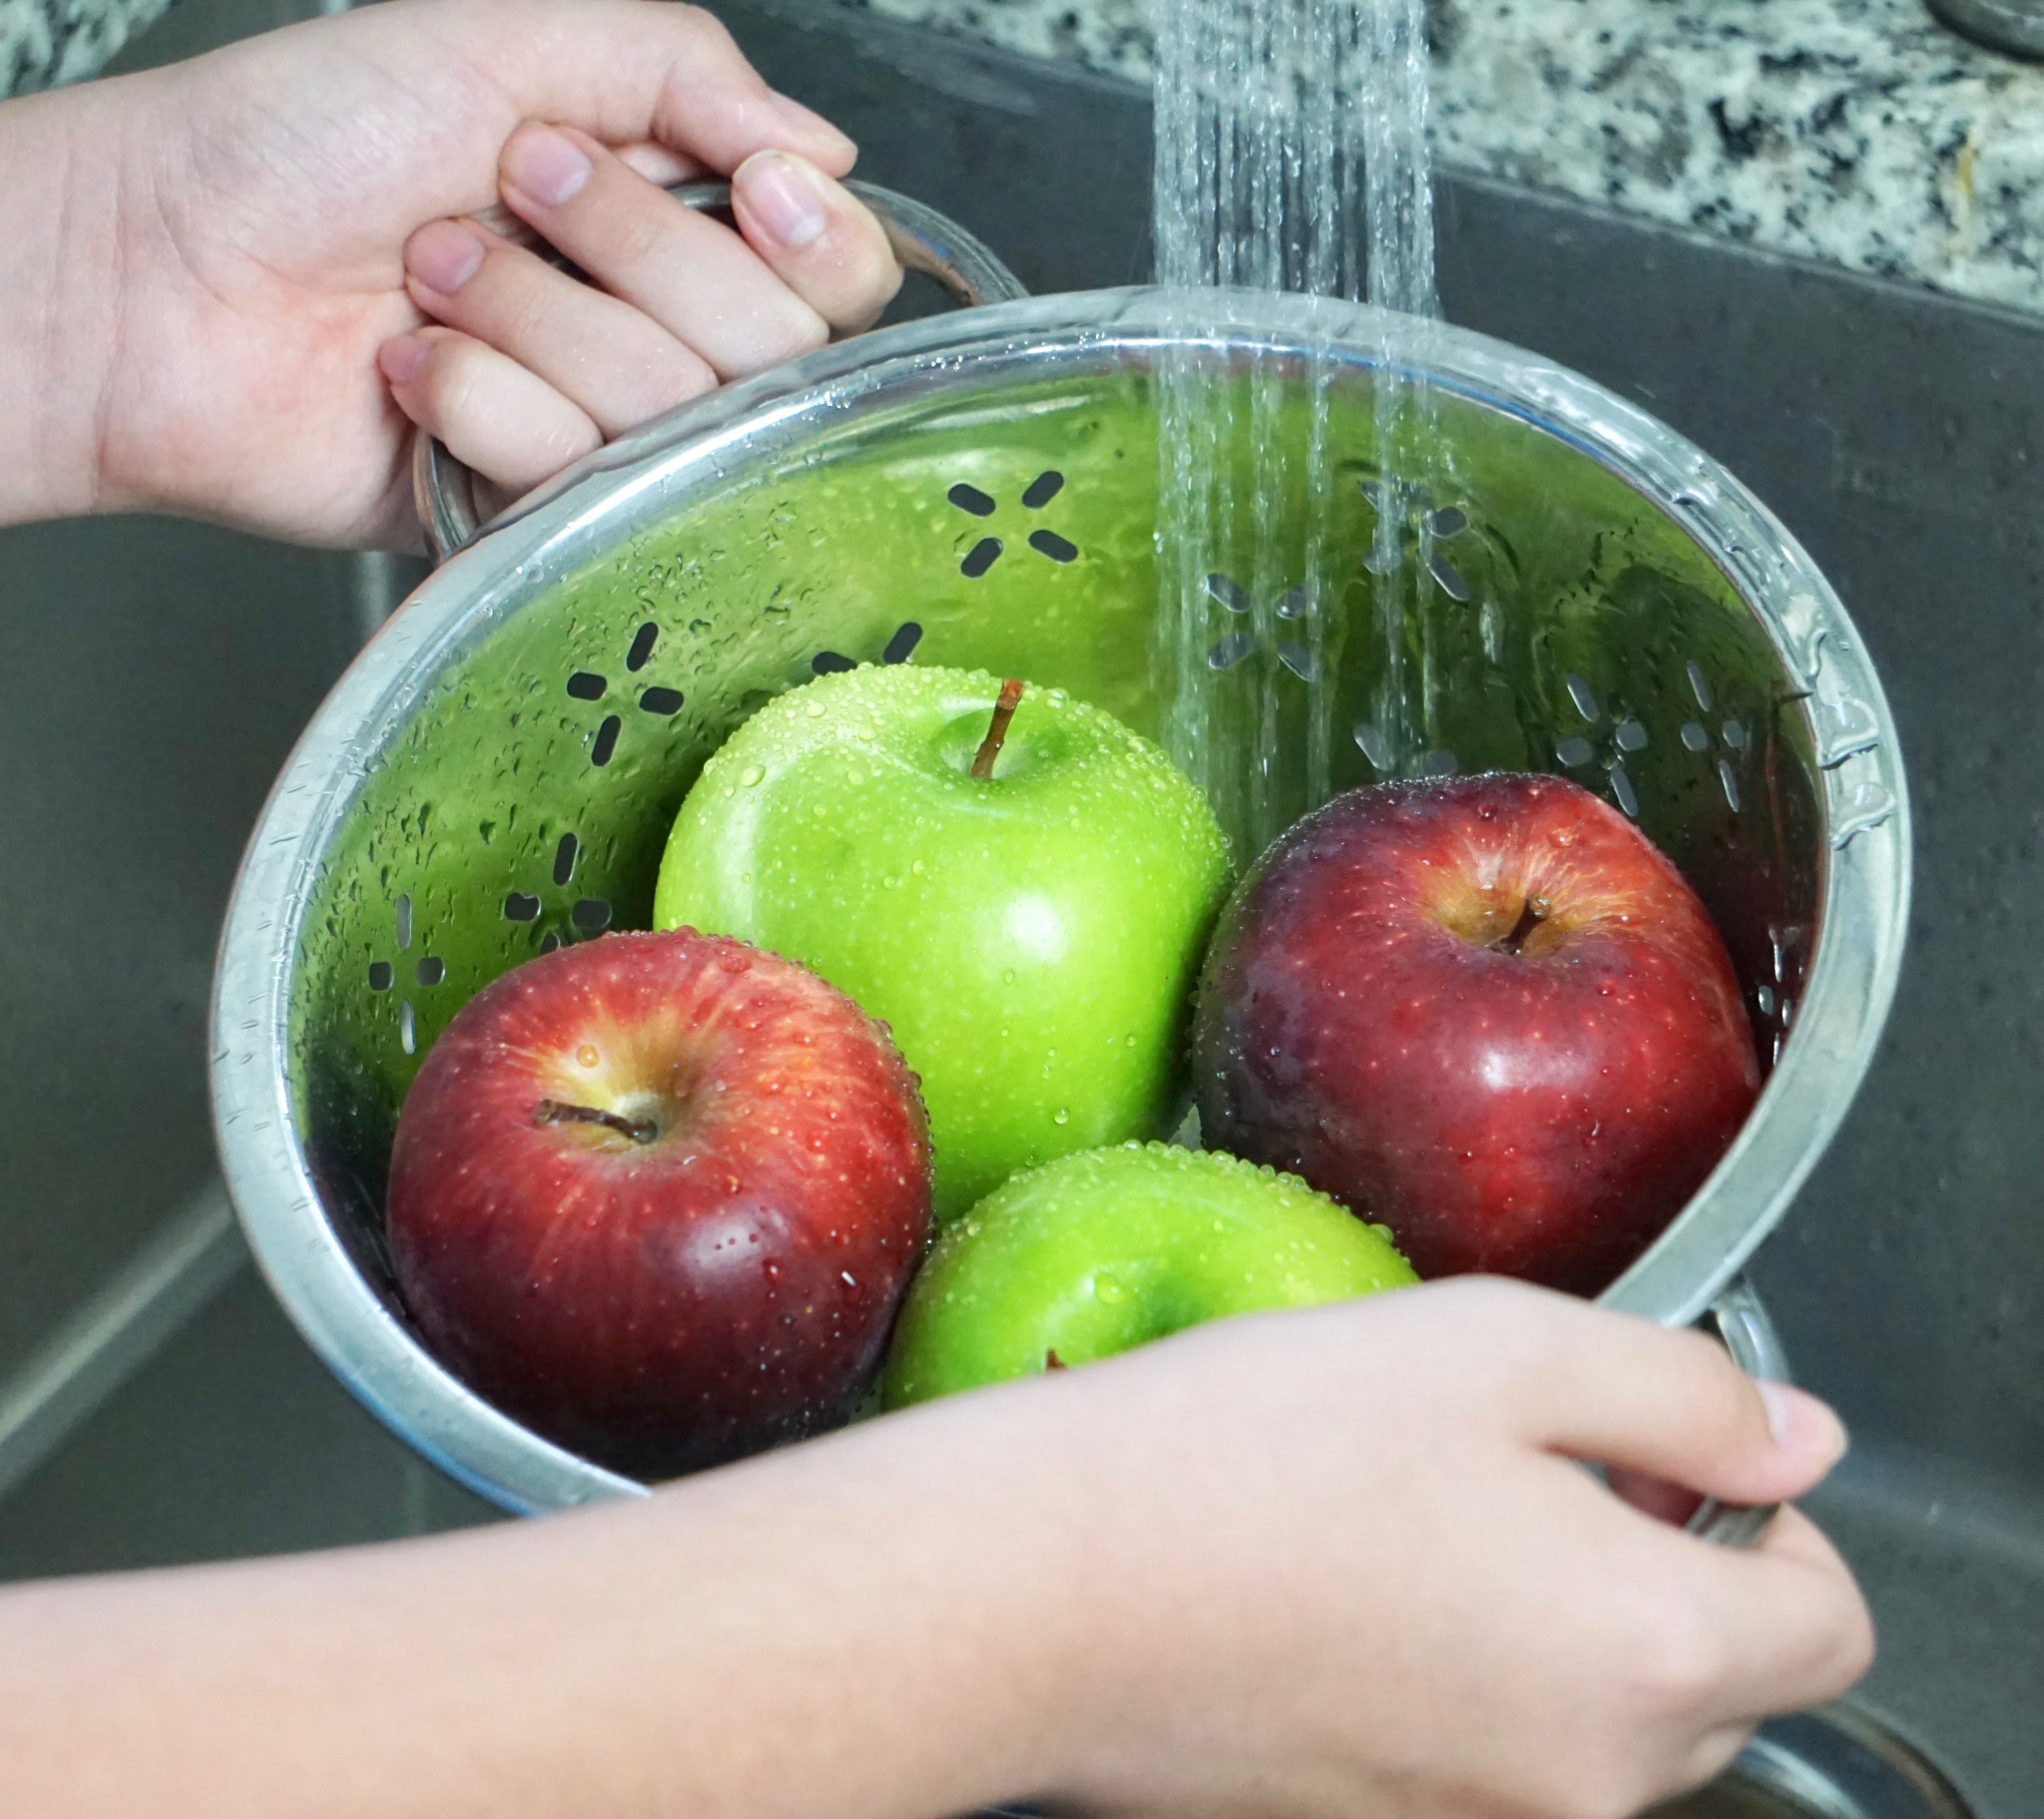 Wash fruits and vegetables